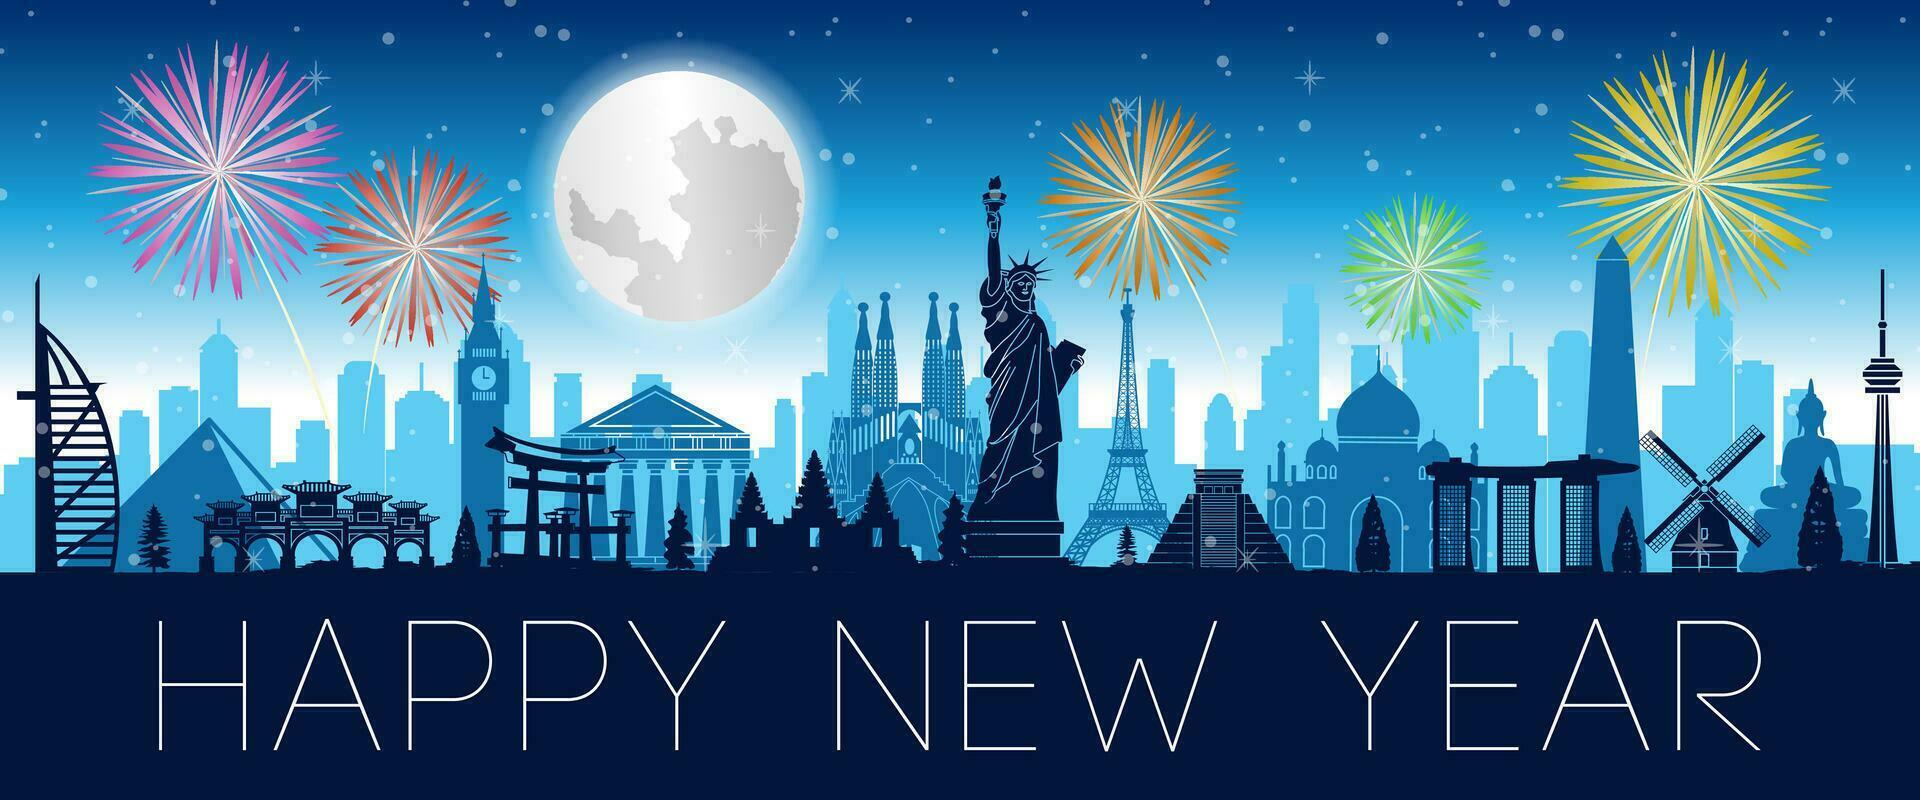 famous landmarks of the world in situation with happy new year night vector